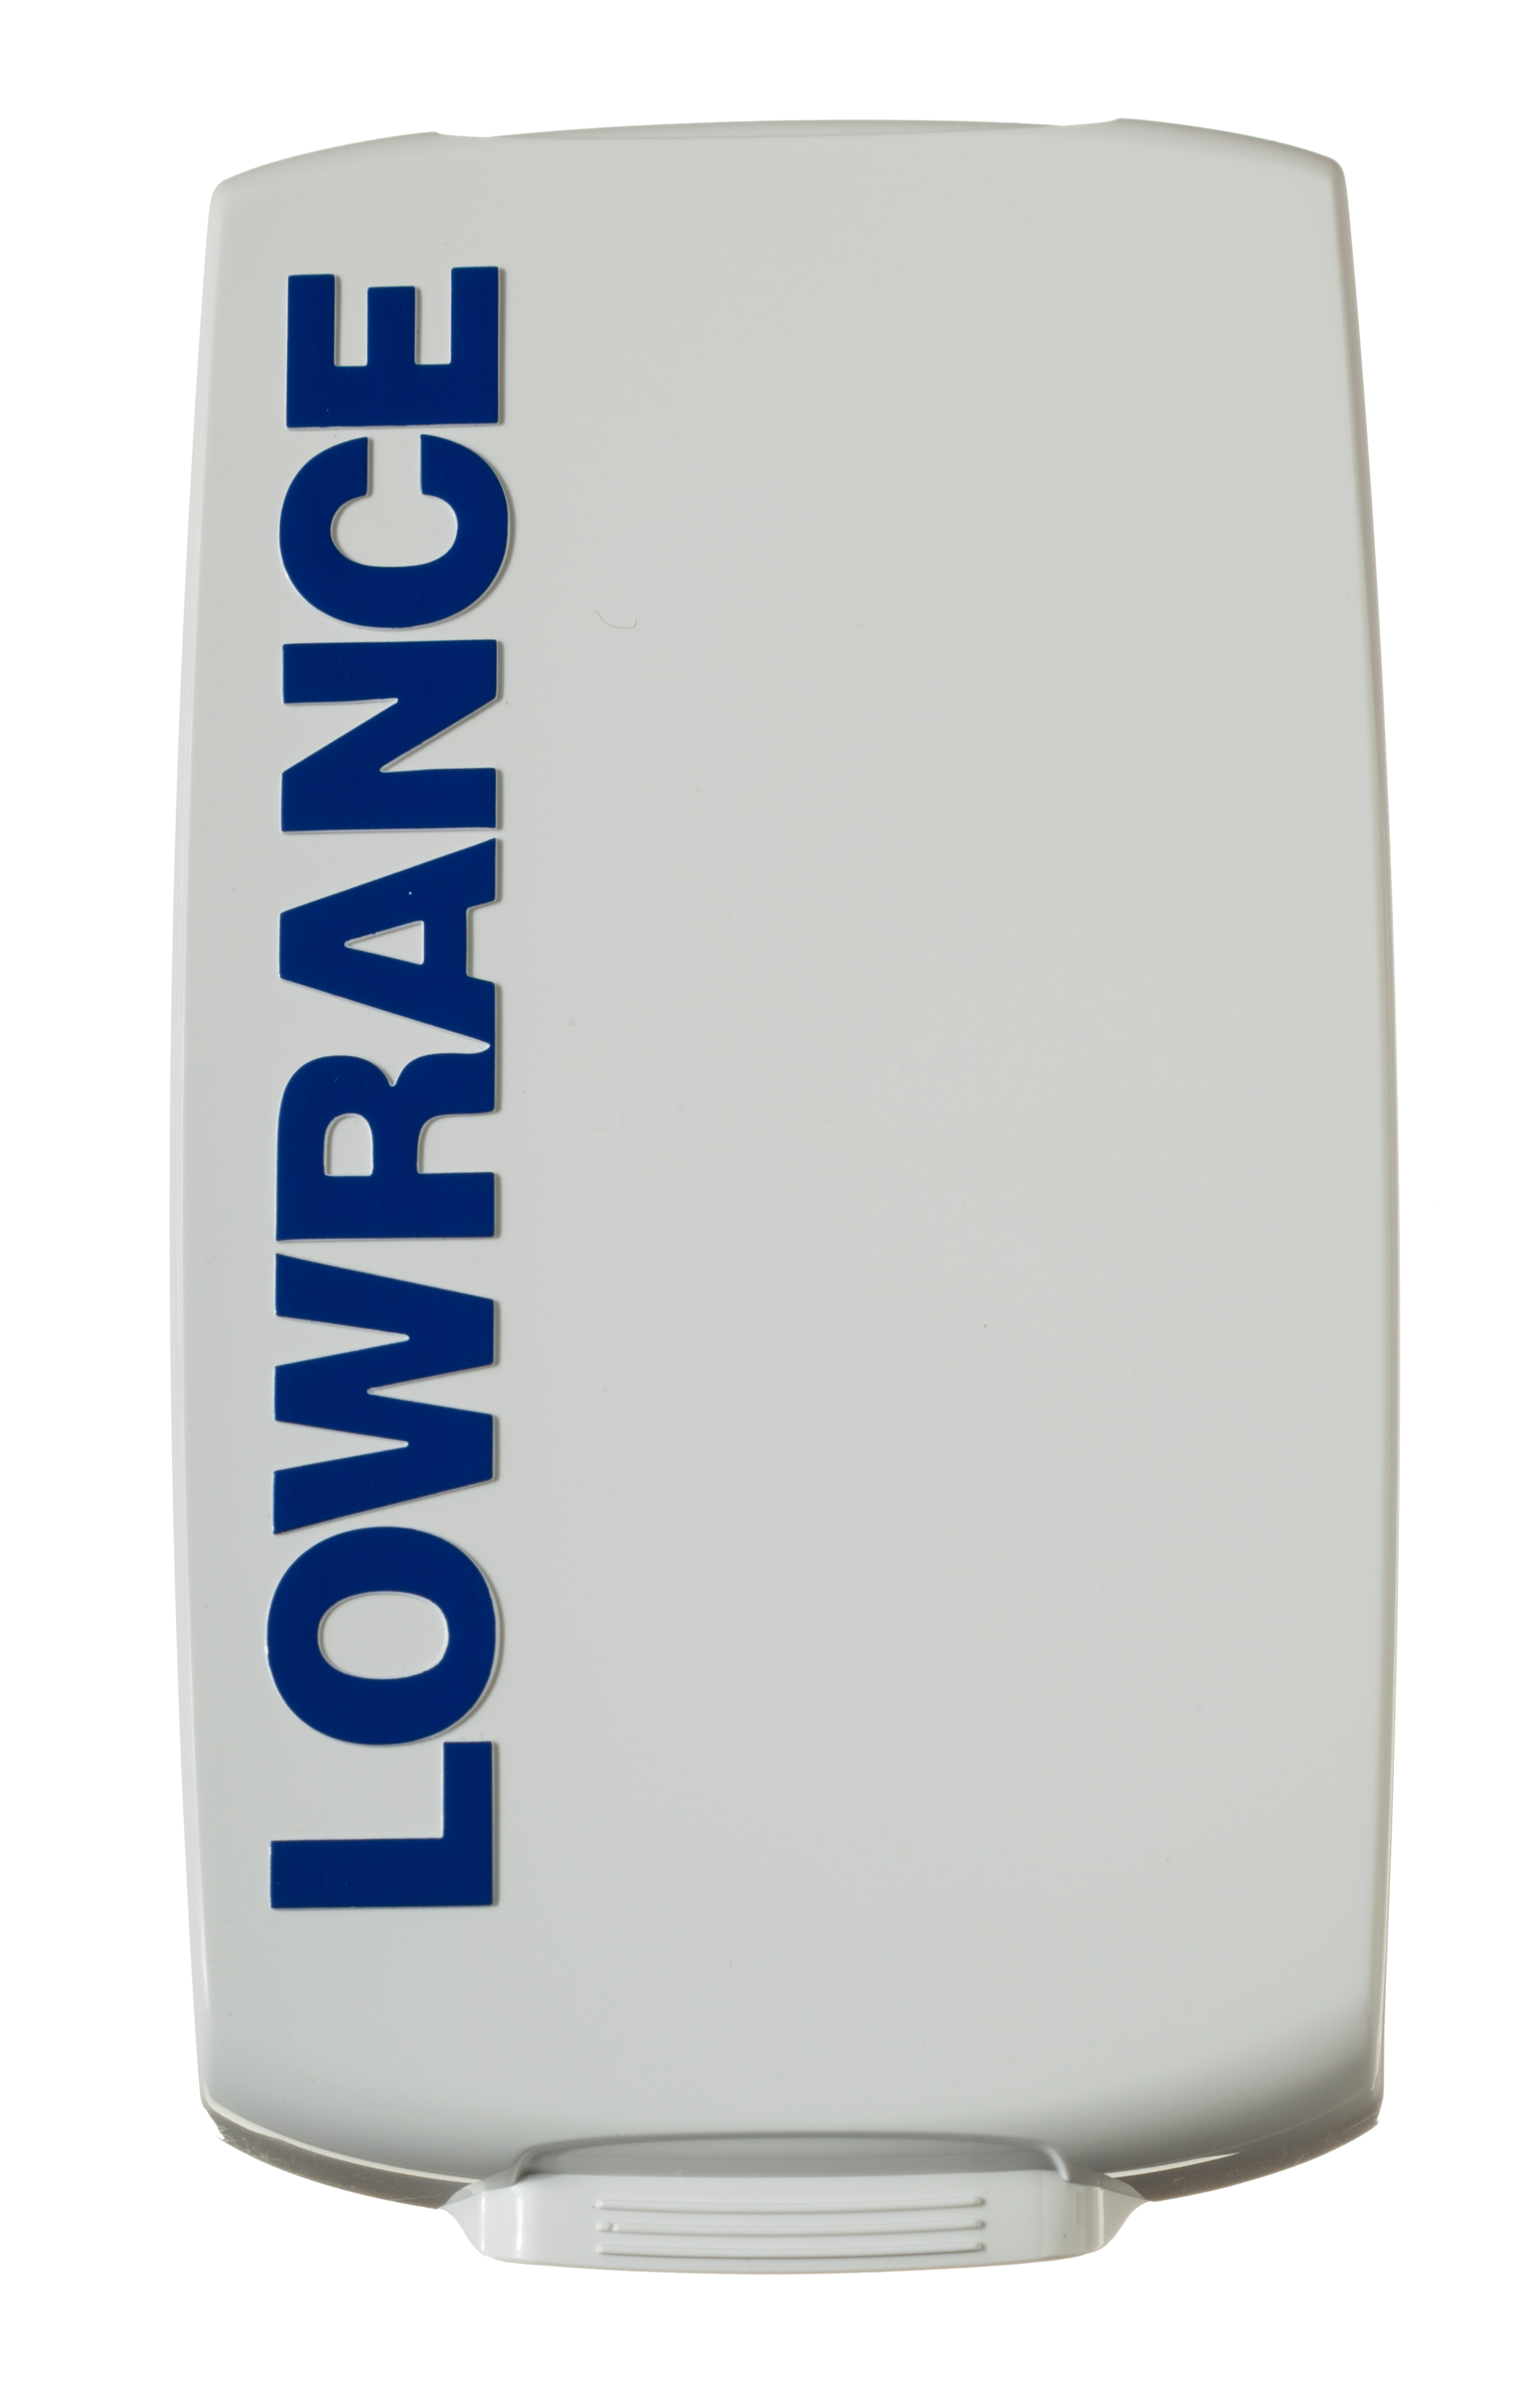 Lowrance Sun Cover for Lowrance 4"" Mark, Elite, and Hook Series